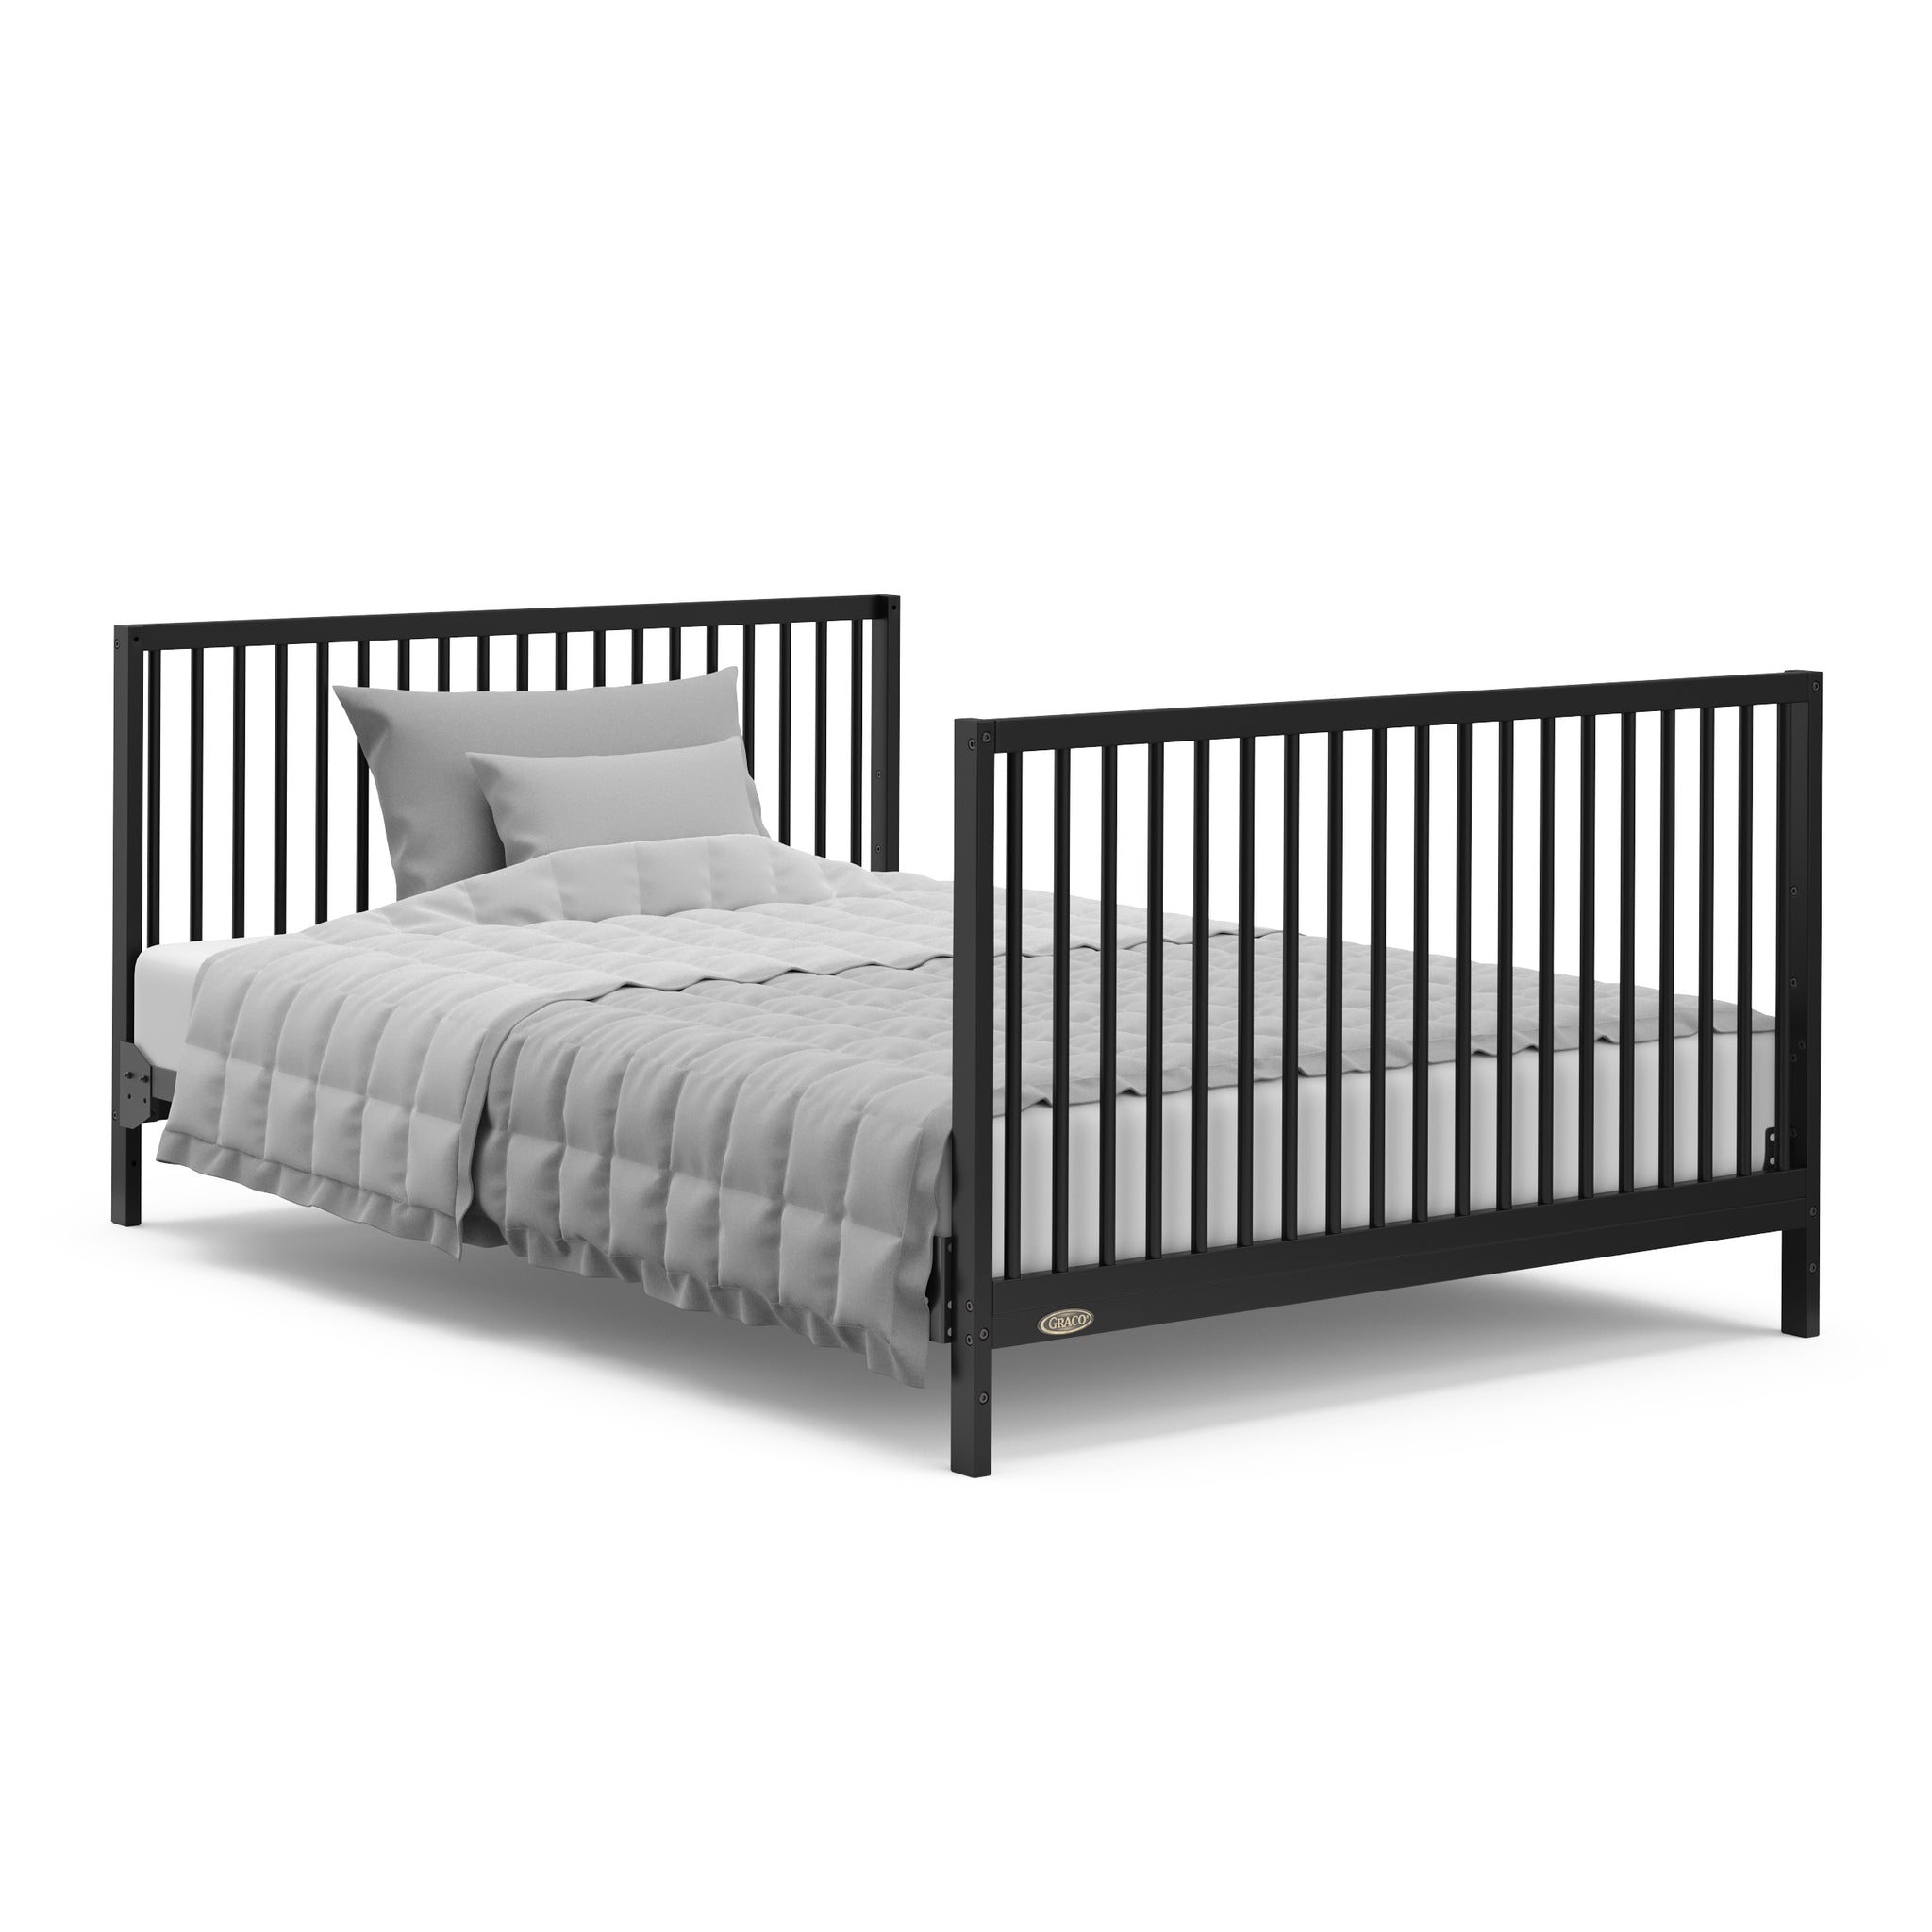 Black crib with drawer in full-size bed with headboard and footboard conversion